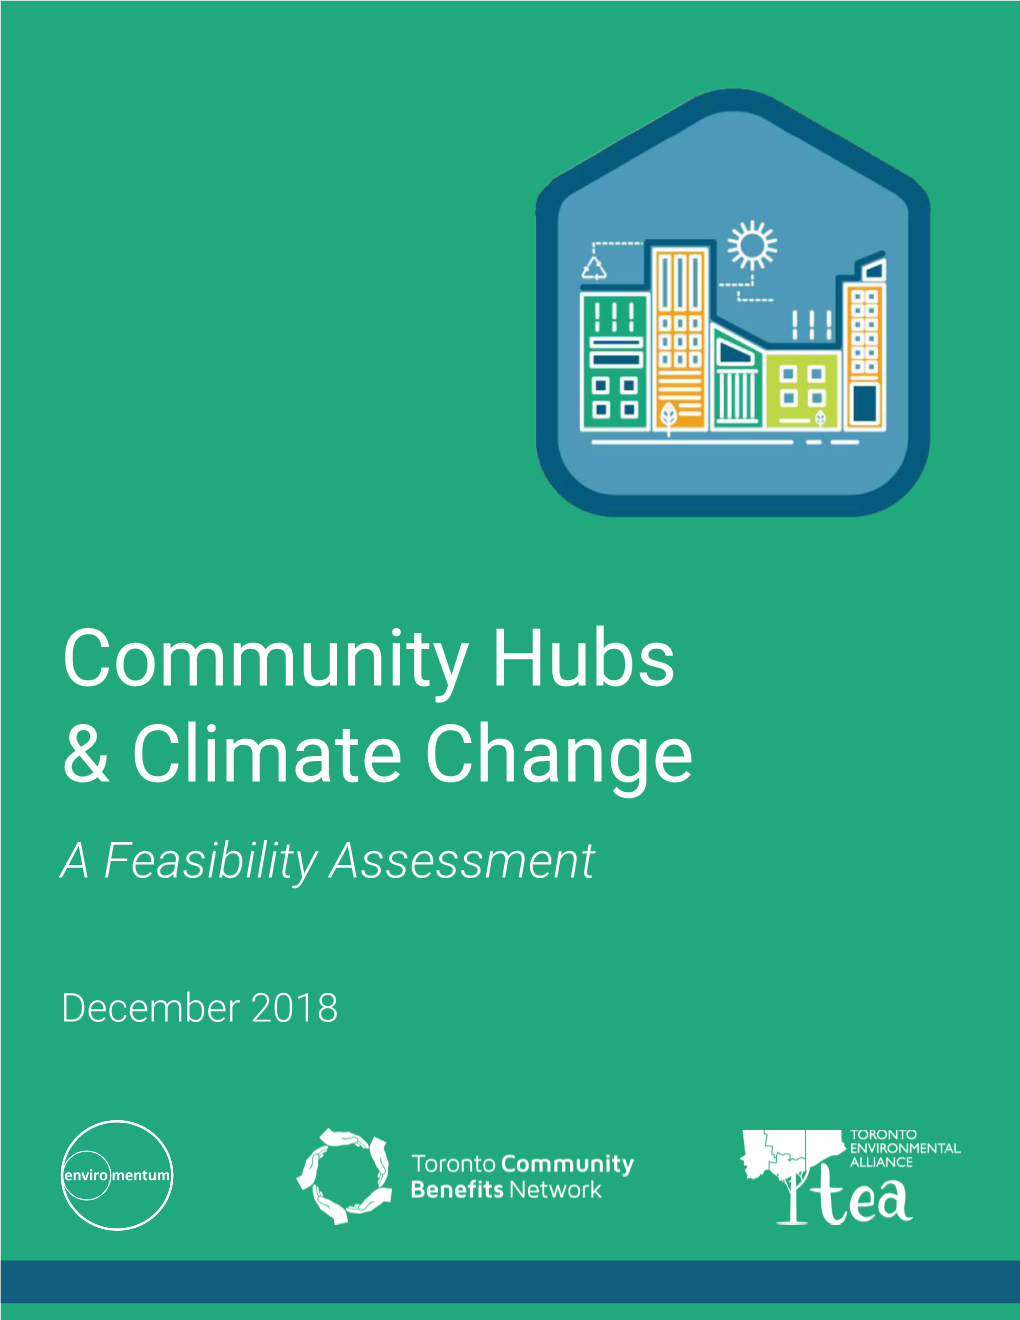 Community Hubs & Climate Change: a Feasibility Assessment